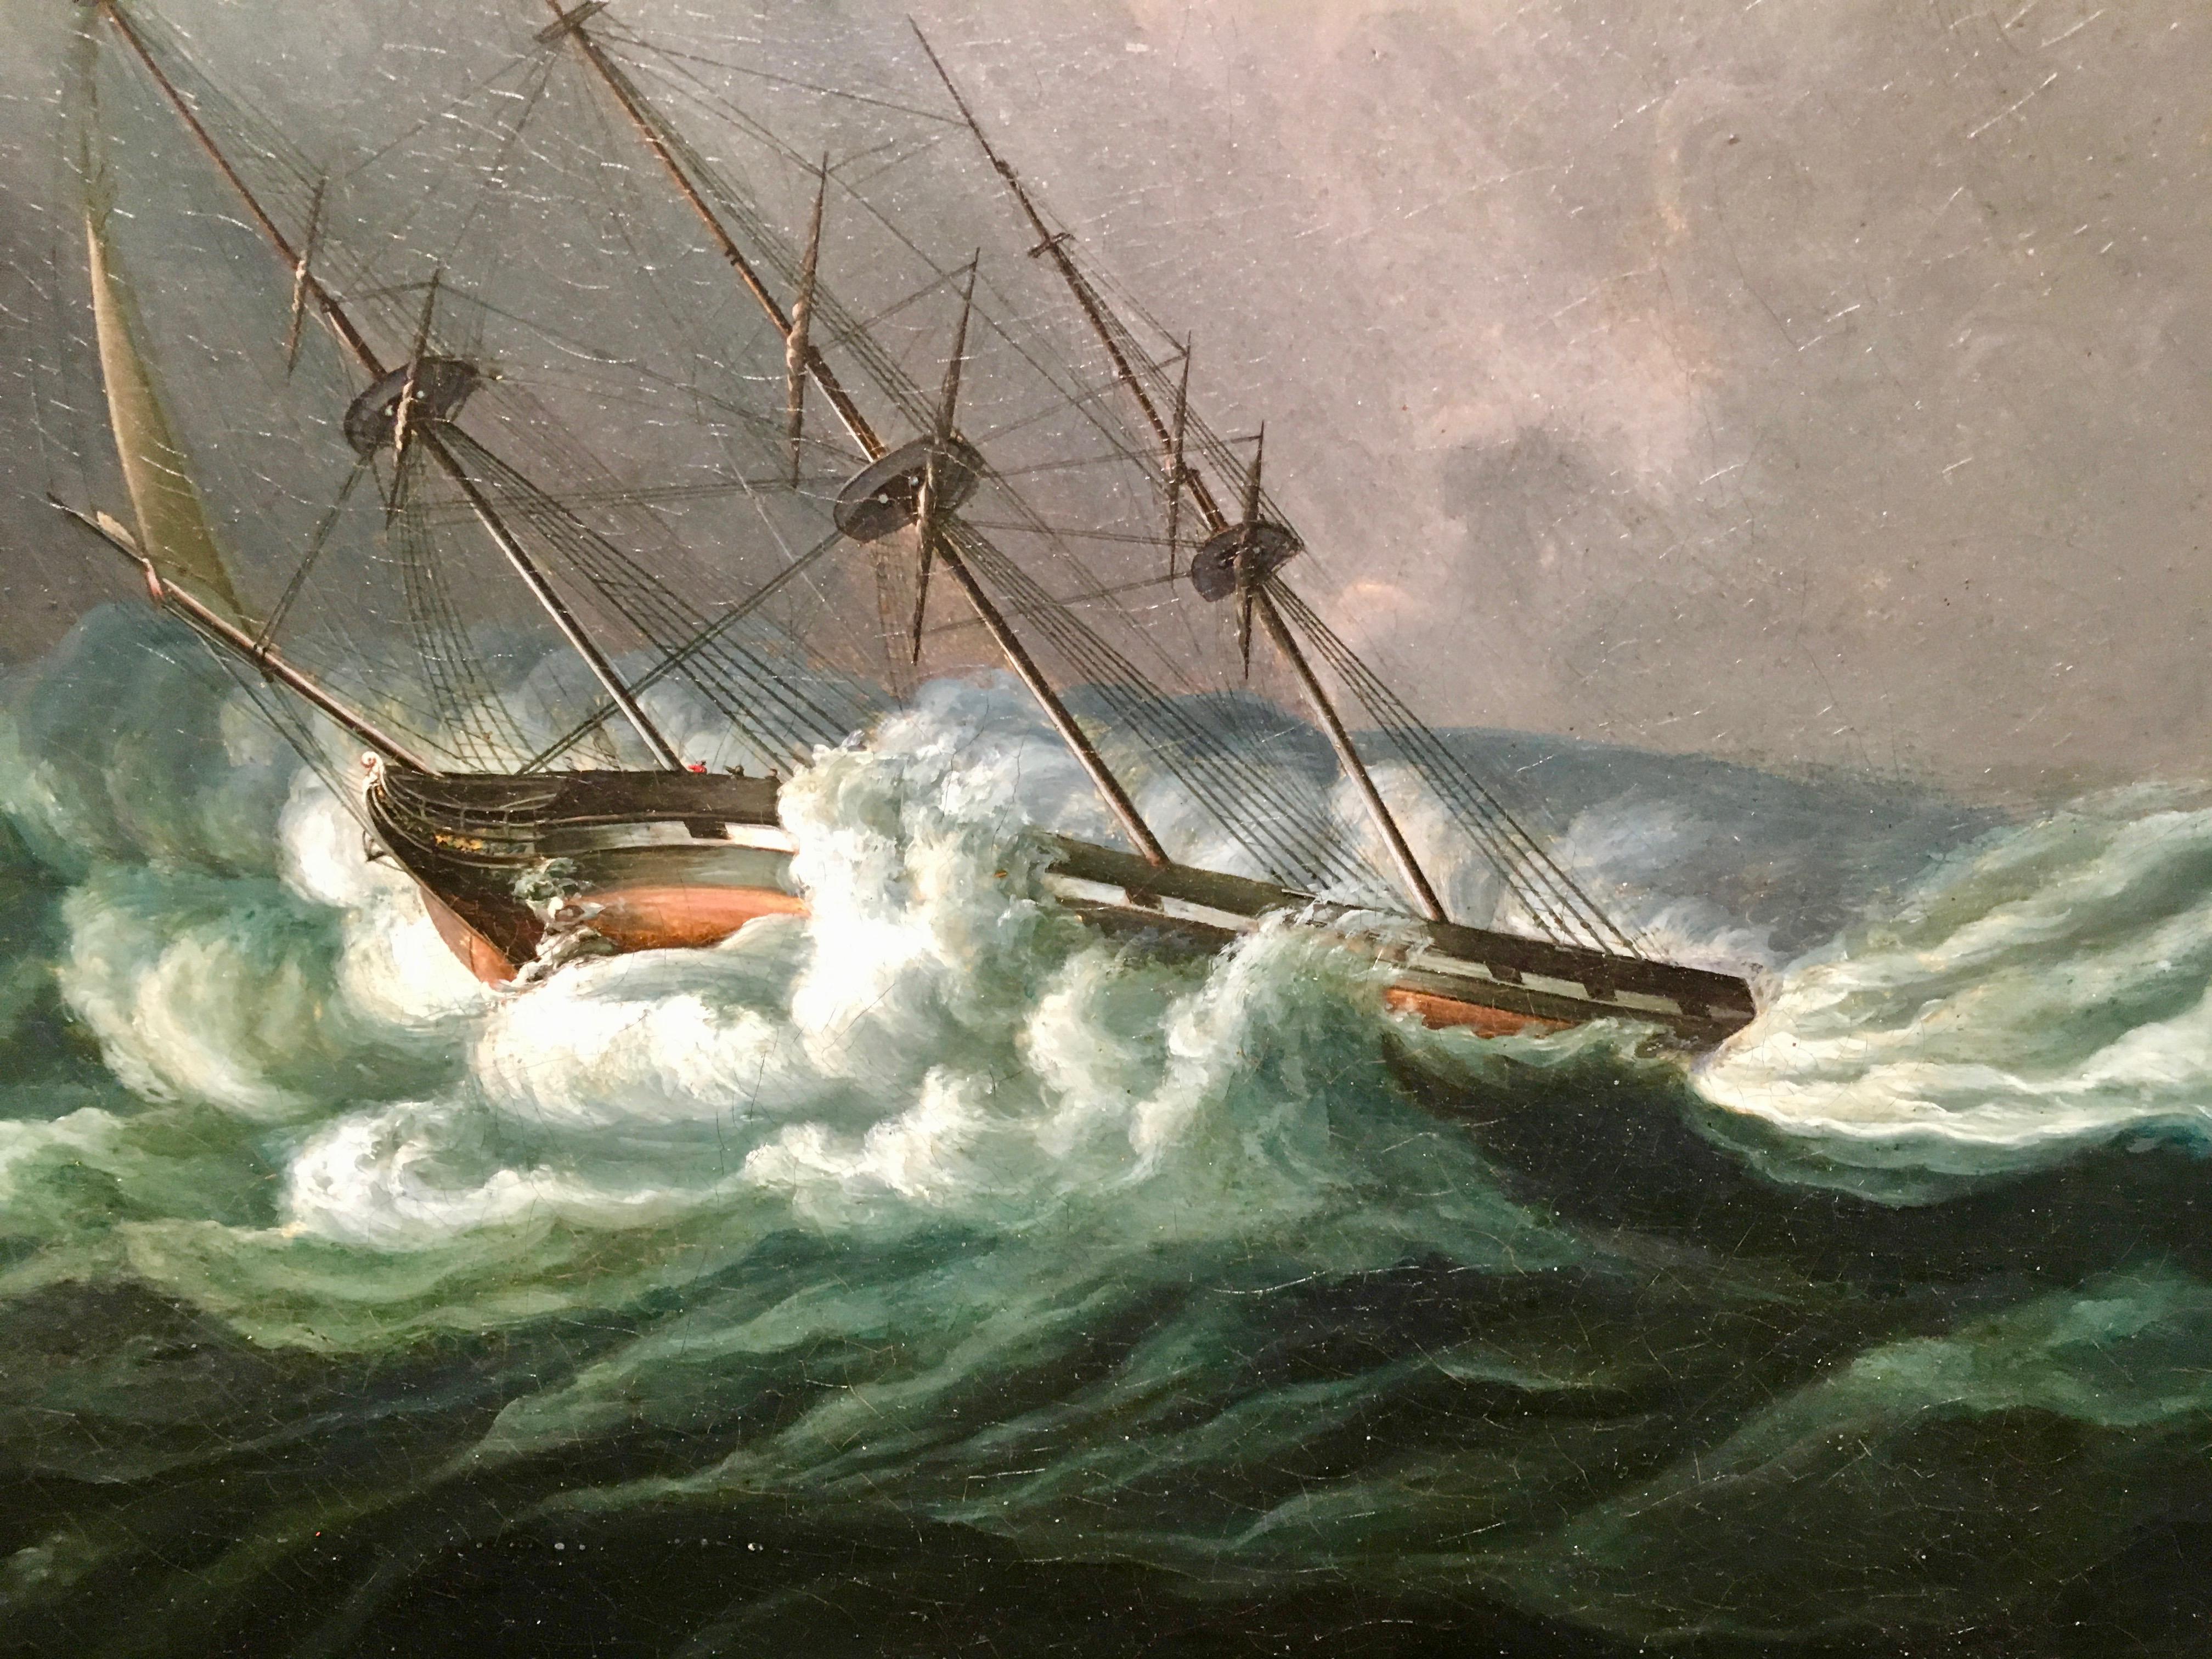 English ship in a rough sea - Painting by James Edward Buttersworth